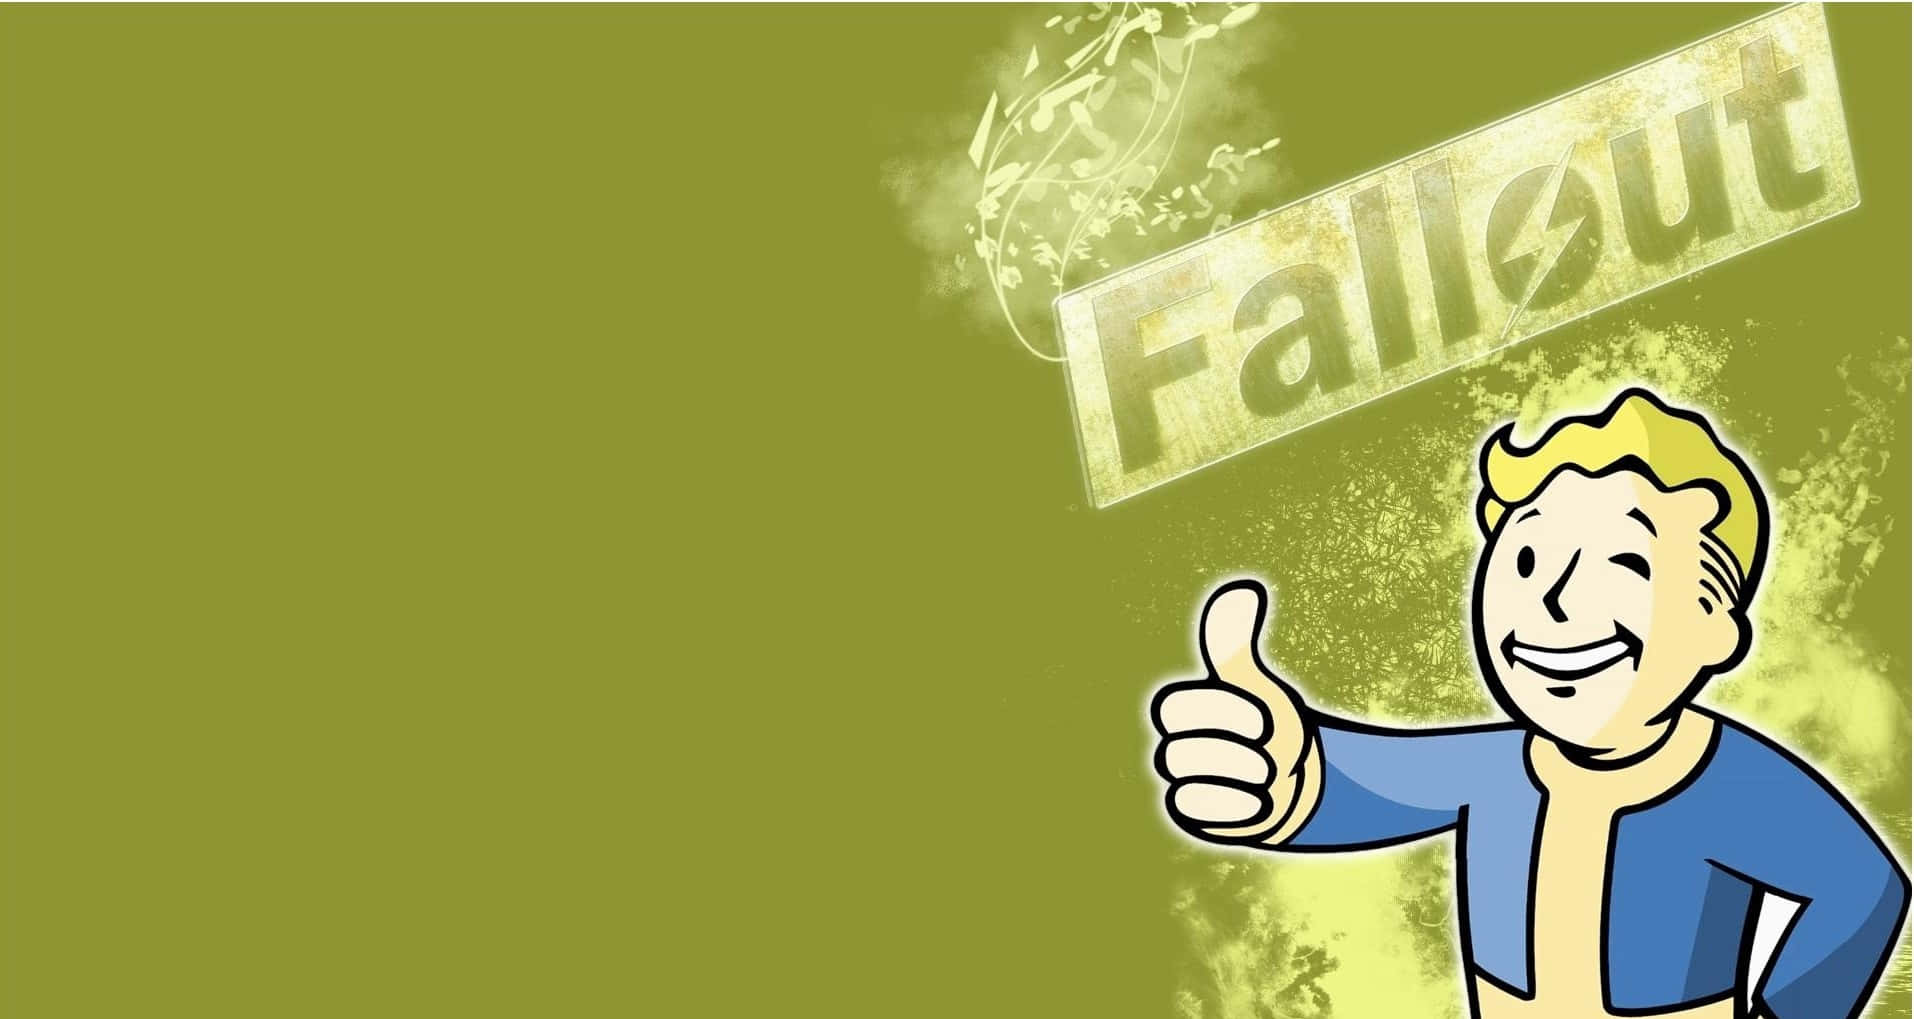 The ever popular Vault Boy from the Fallout universe Wallpaper